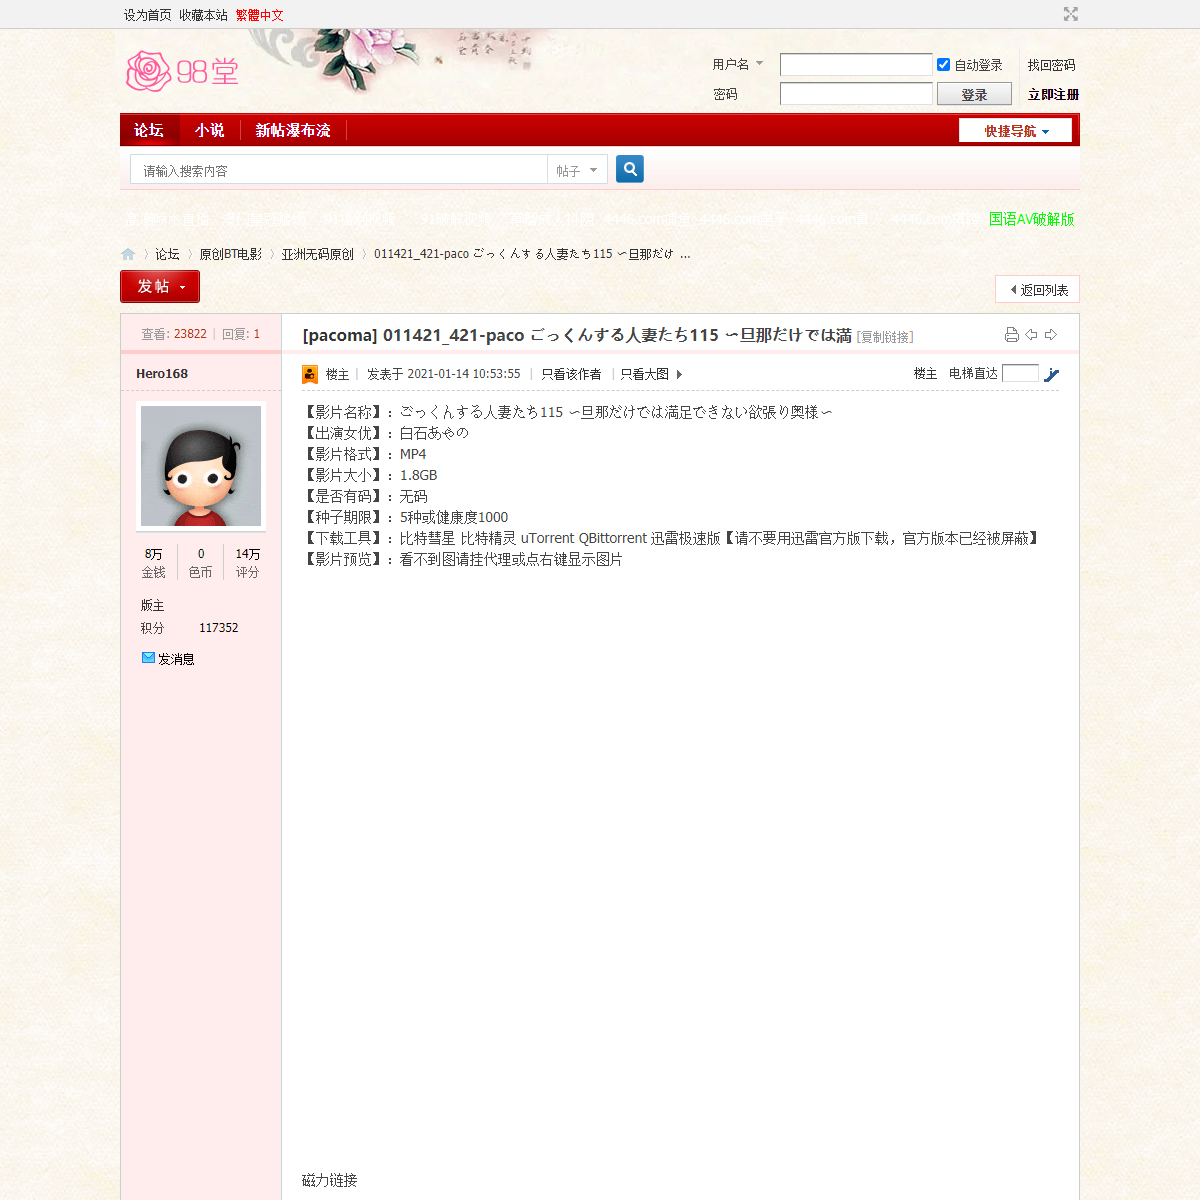 A complete backup of https://sehuatang.net/thread-442811-1-1.html